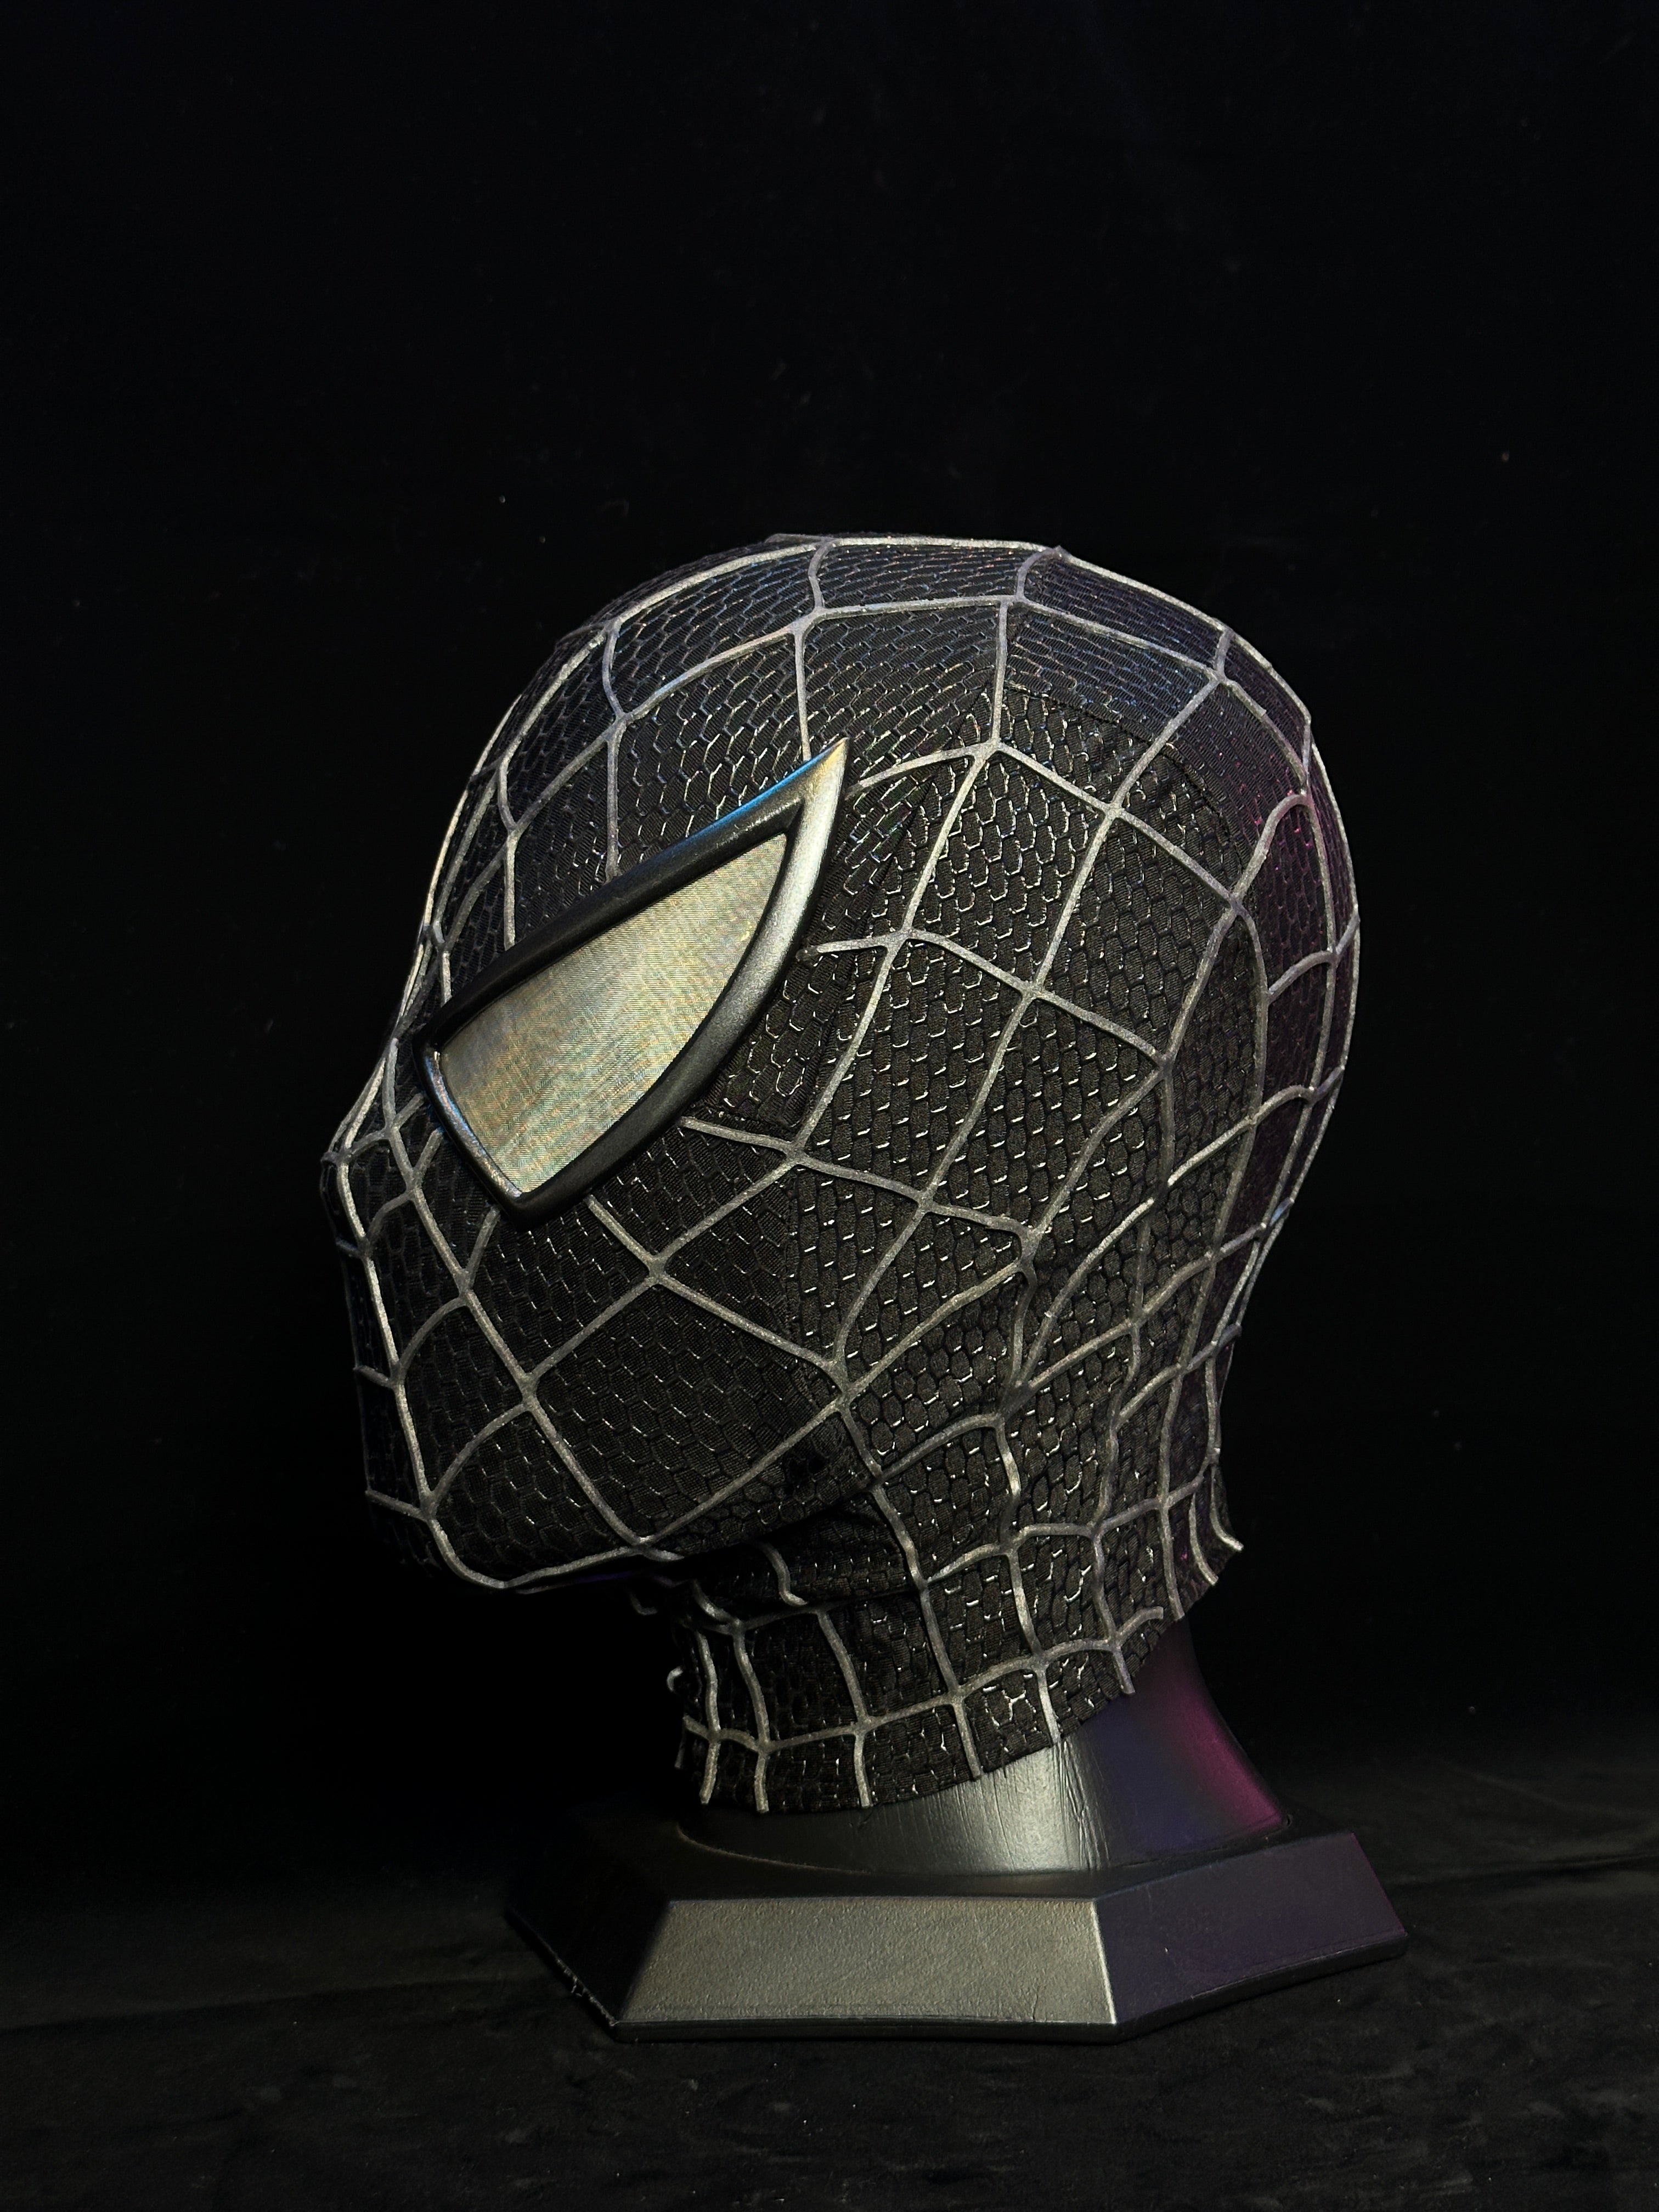 Sam Raimi Spidey3 venom mask (Adults) with Face shell & 3D Rubber Web, Wearable Movie Prop Replica